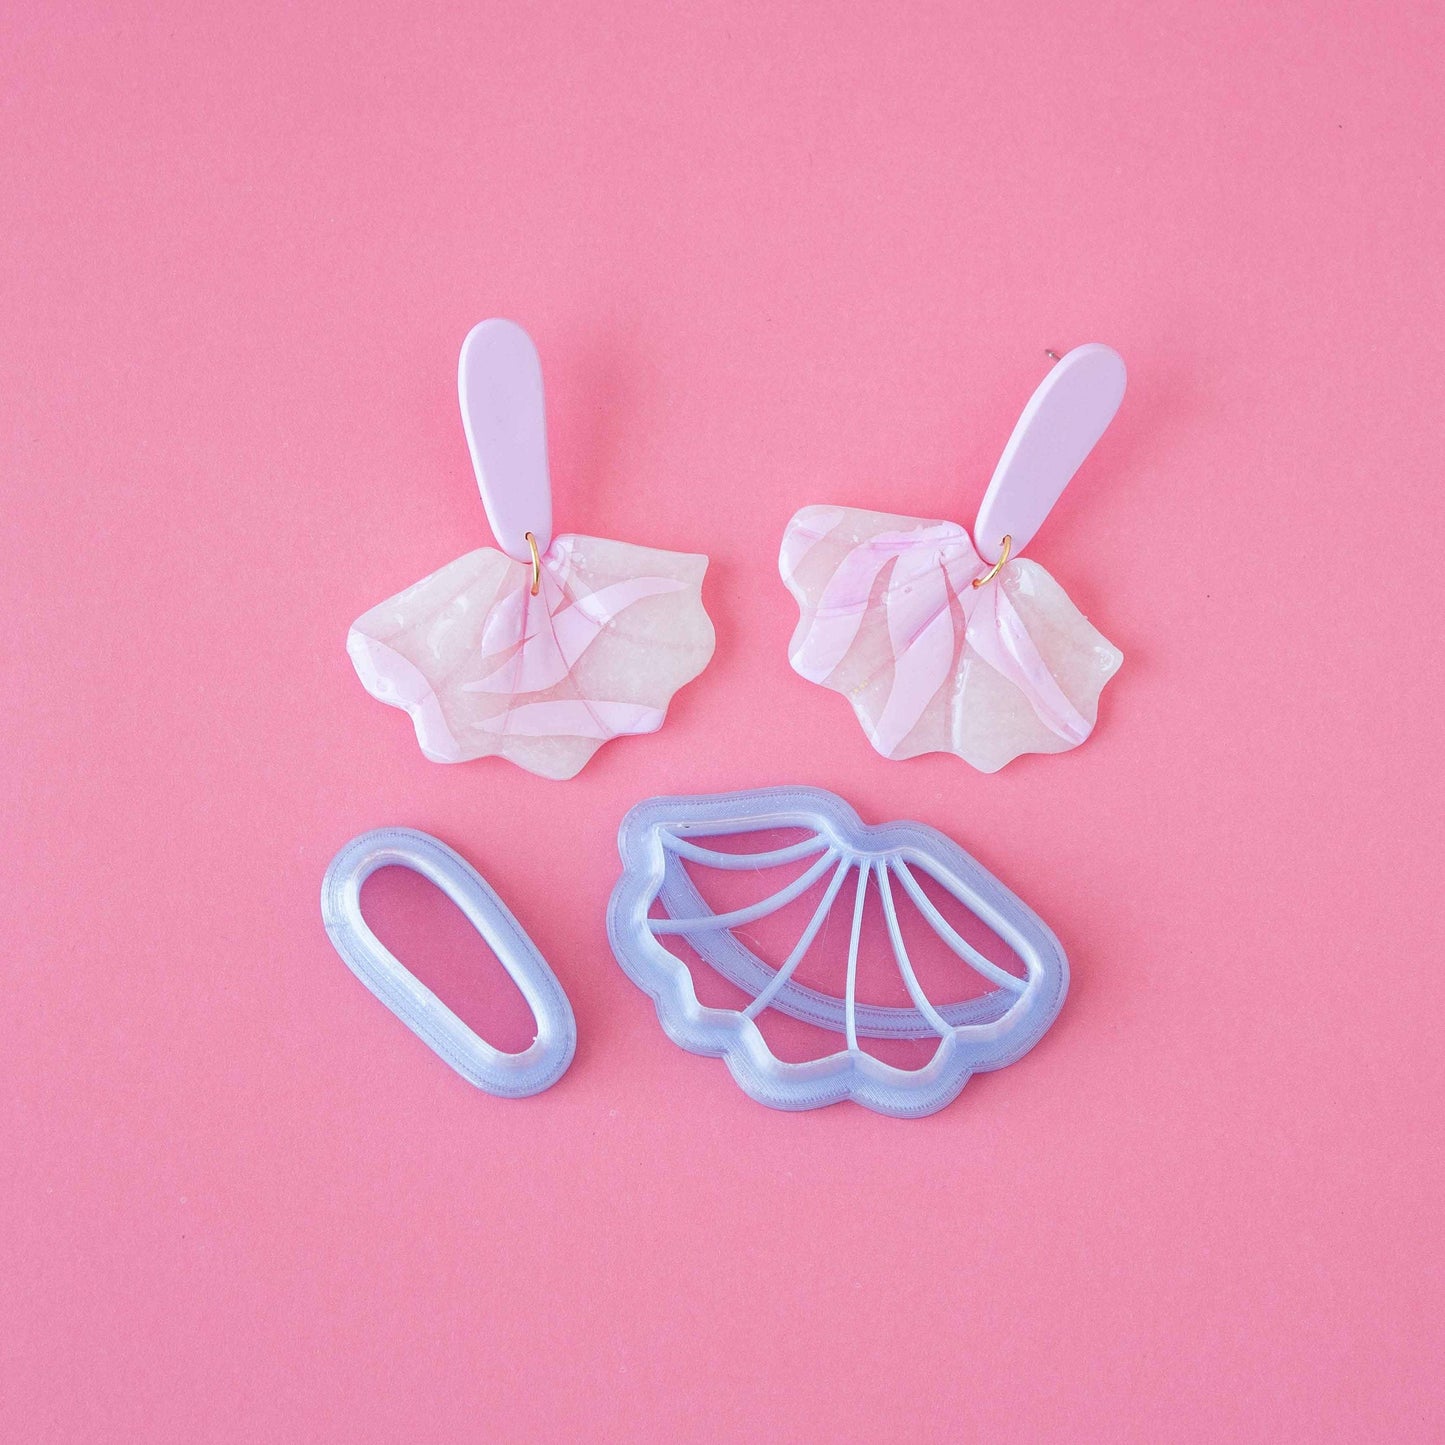 A set of small cutters on a pink background.